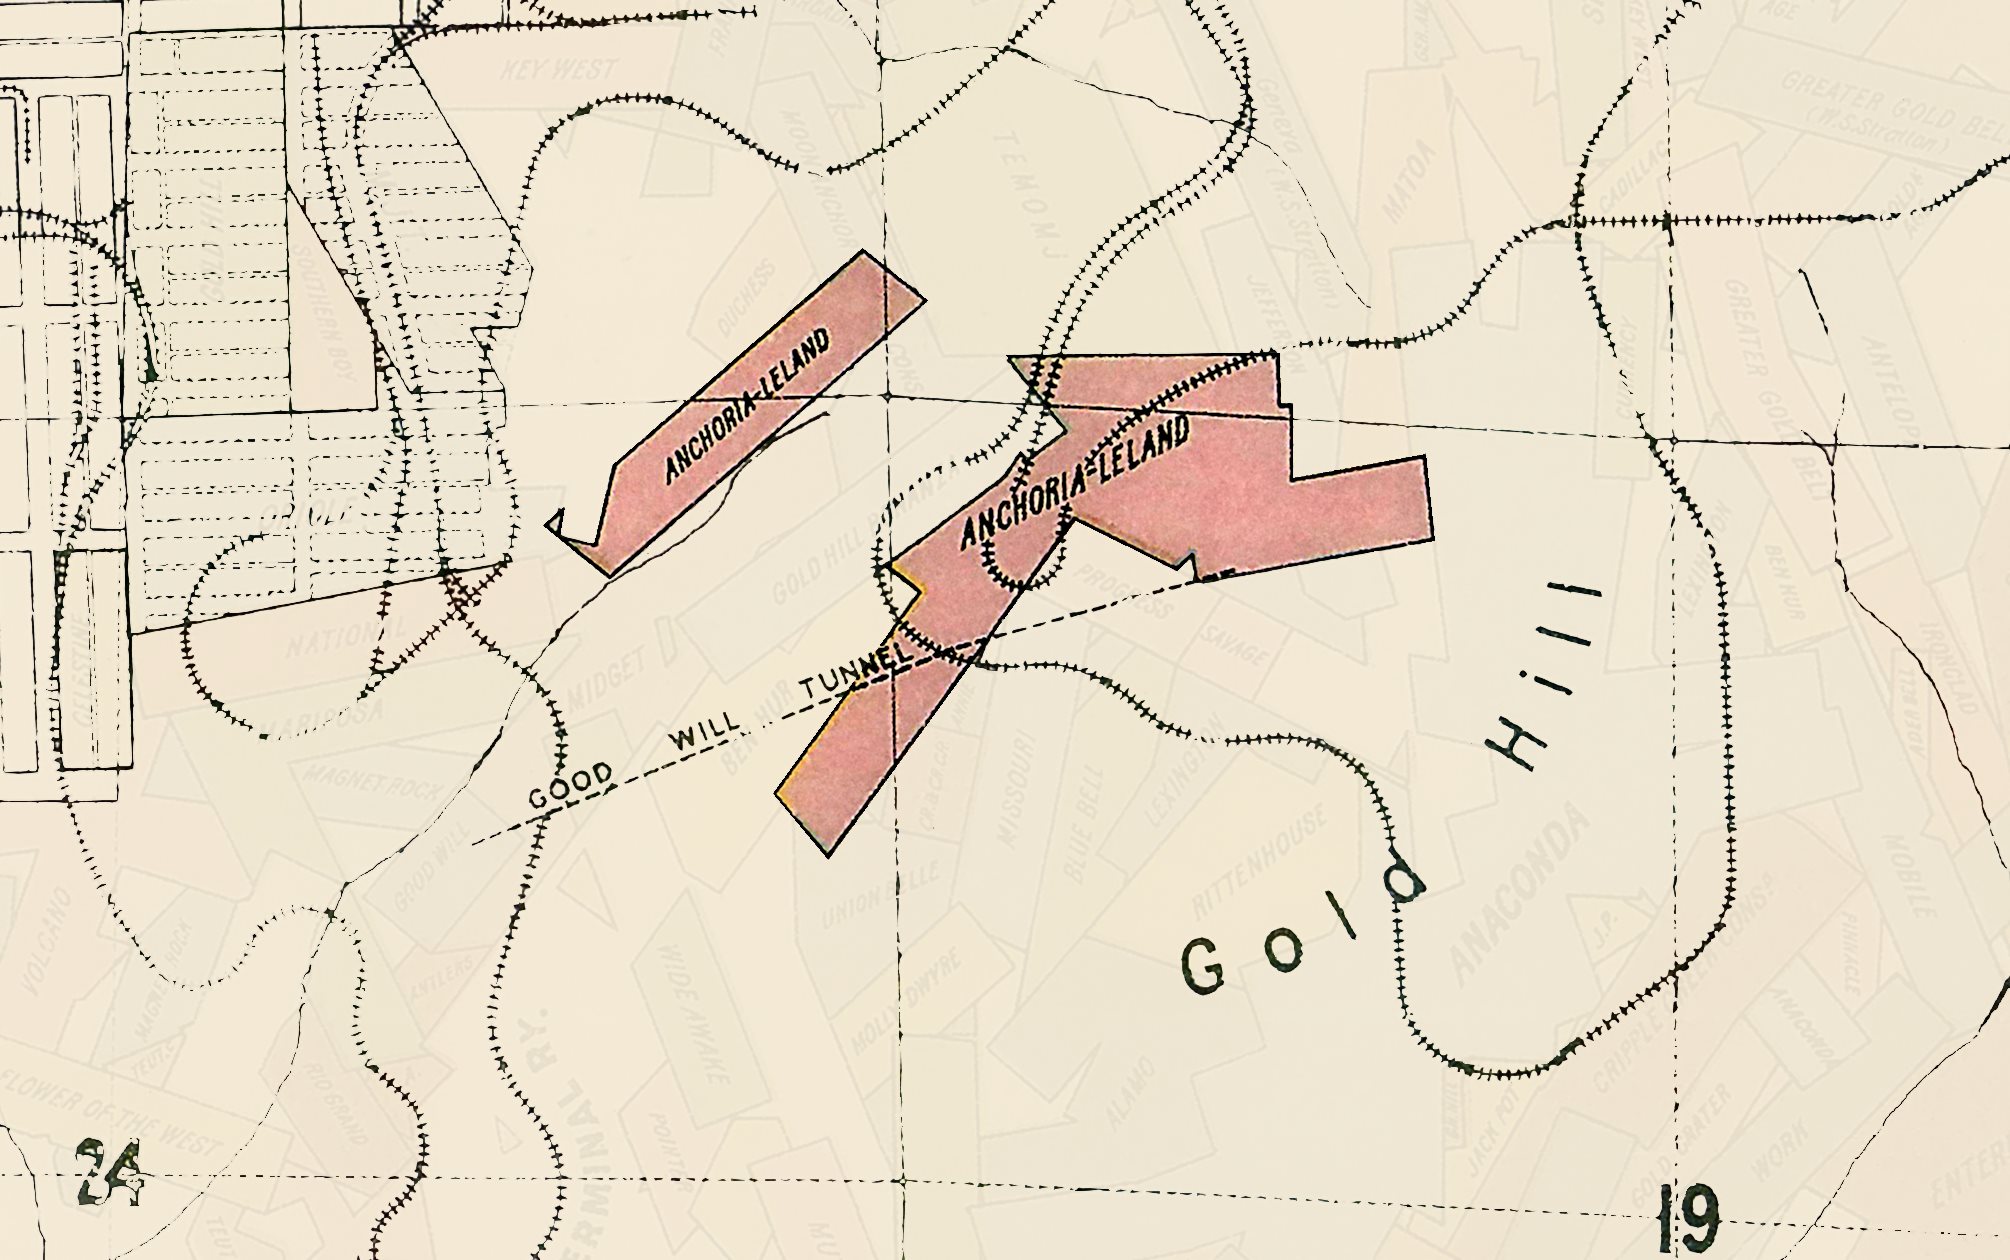 1900 Map of Anchoria-Leland Mining and Milling Company Properties in the Cripple Creek District